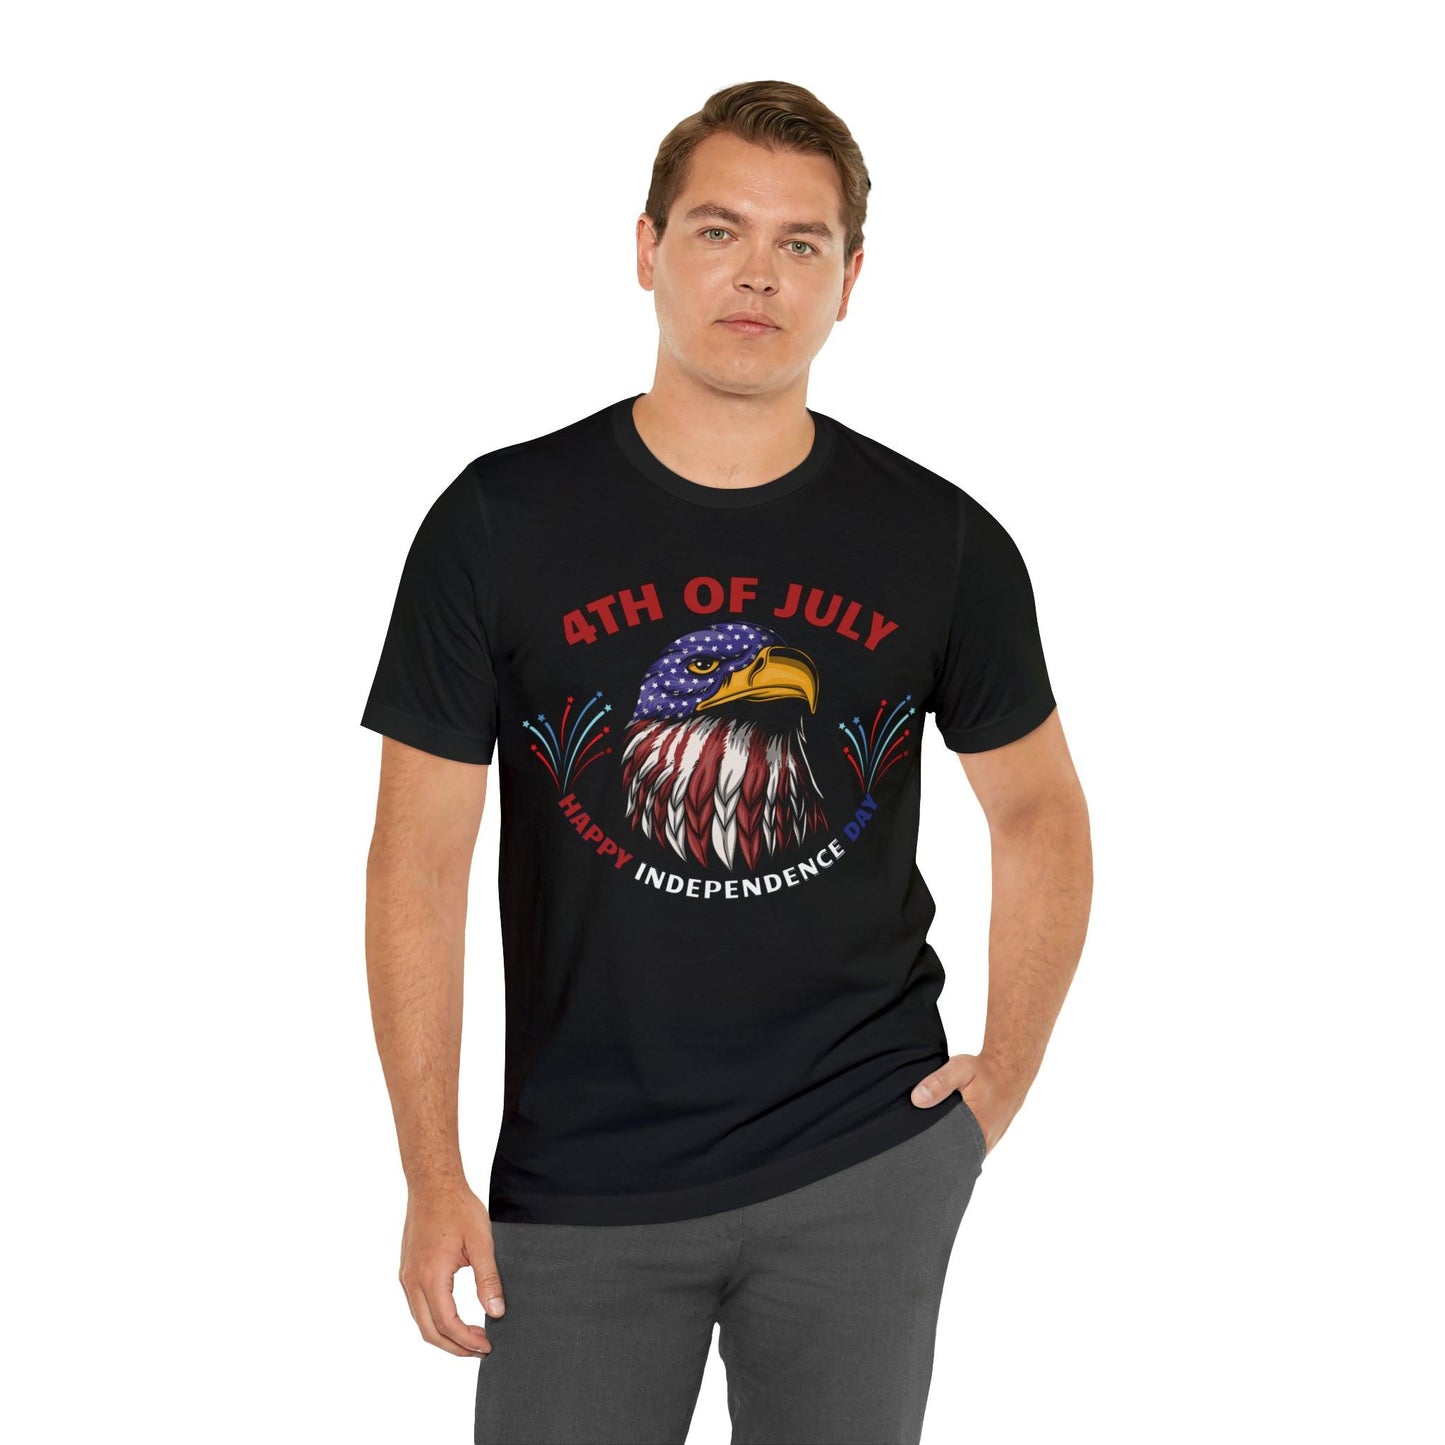 Celebrate Independence Day with Patriotic Shirts: Land of the free Shirts for Women and Men